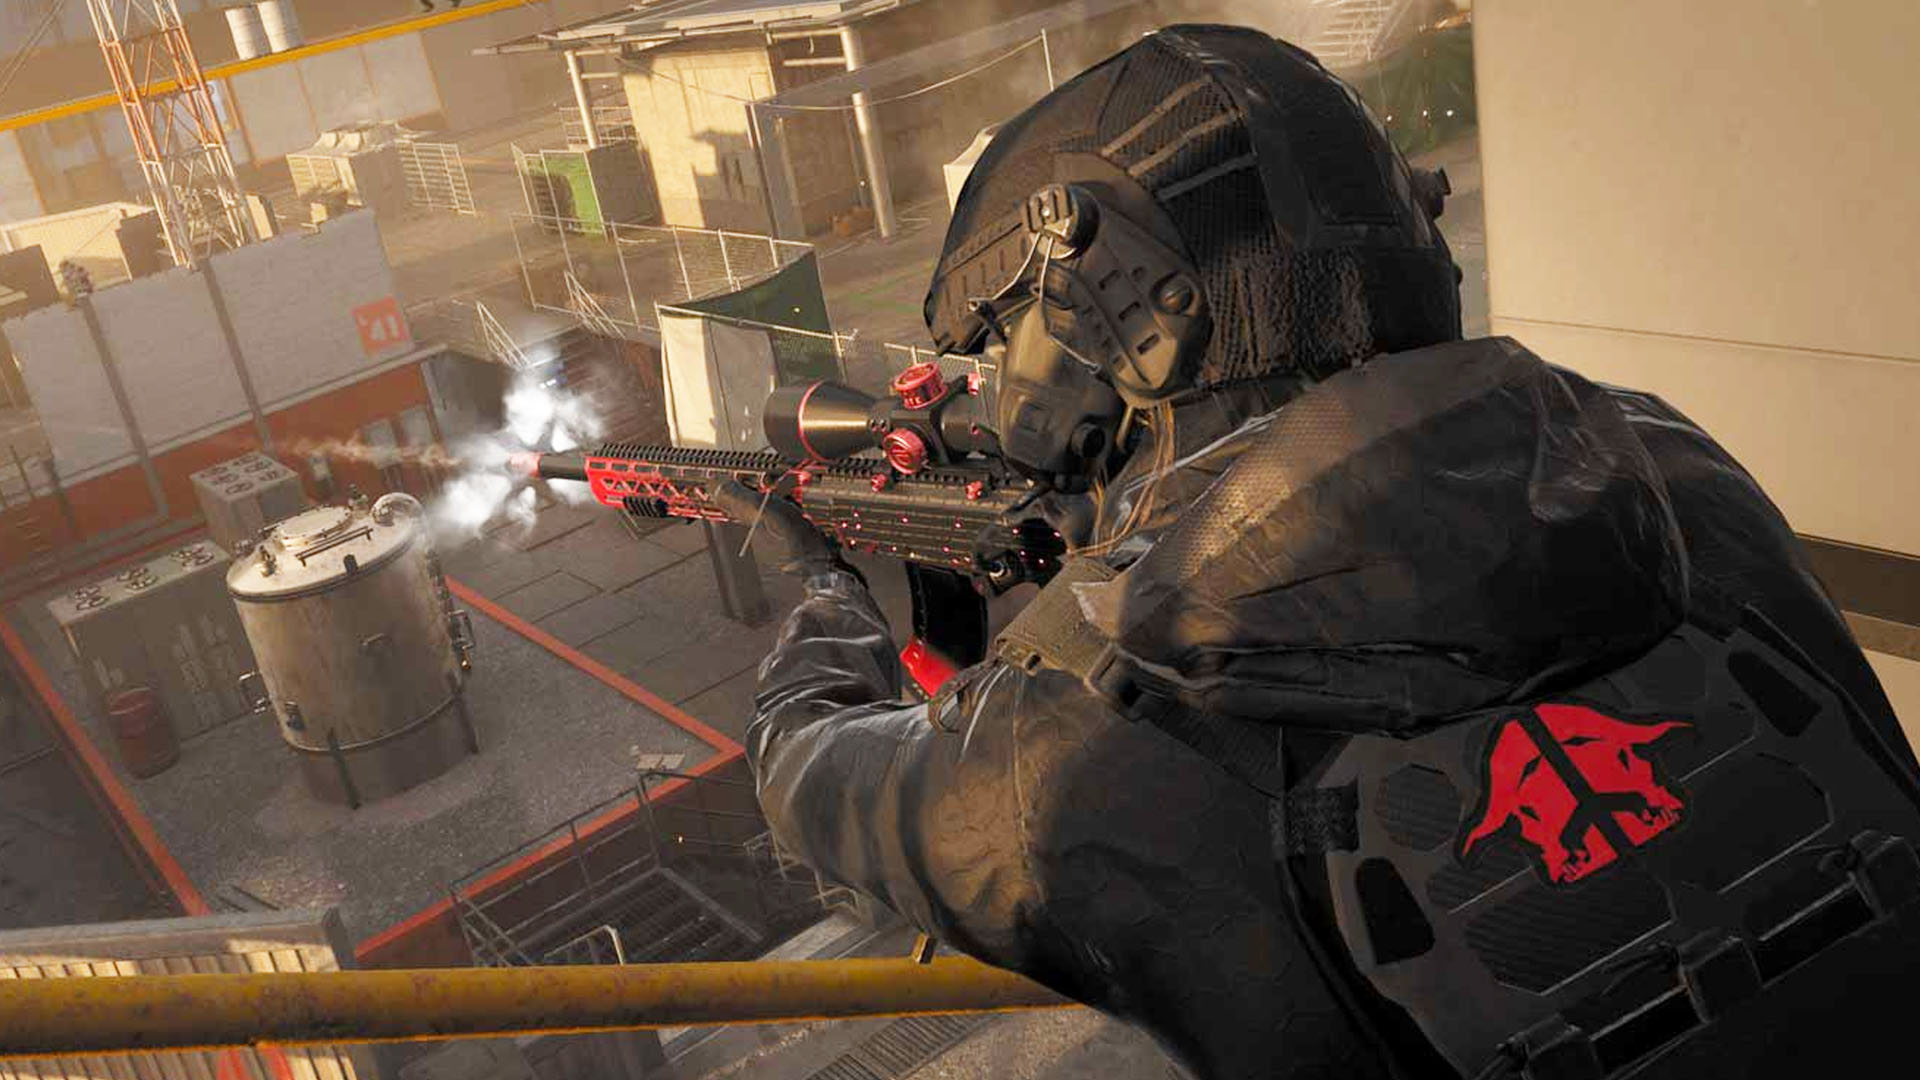 Modern Warfare 3 Beta - Recommended Loadouts and Perks